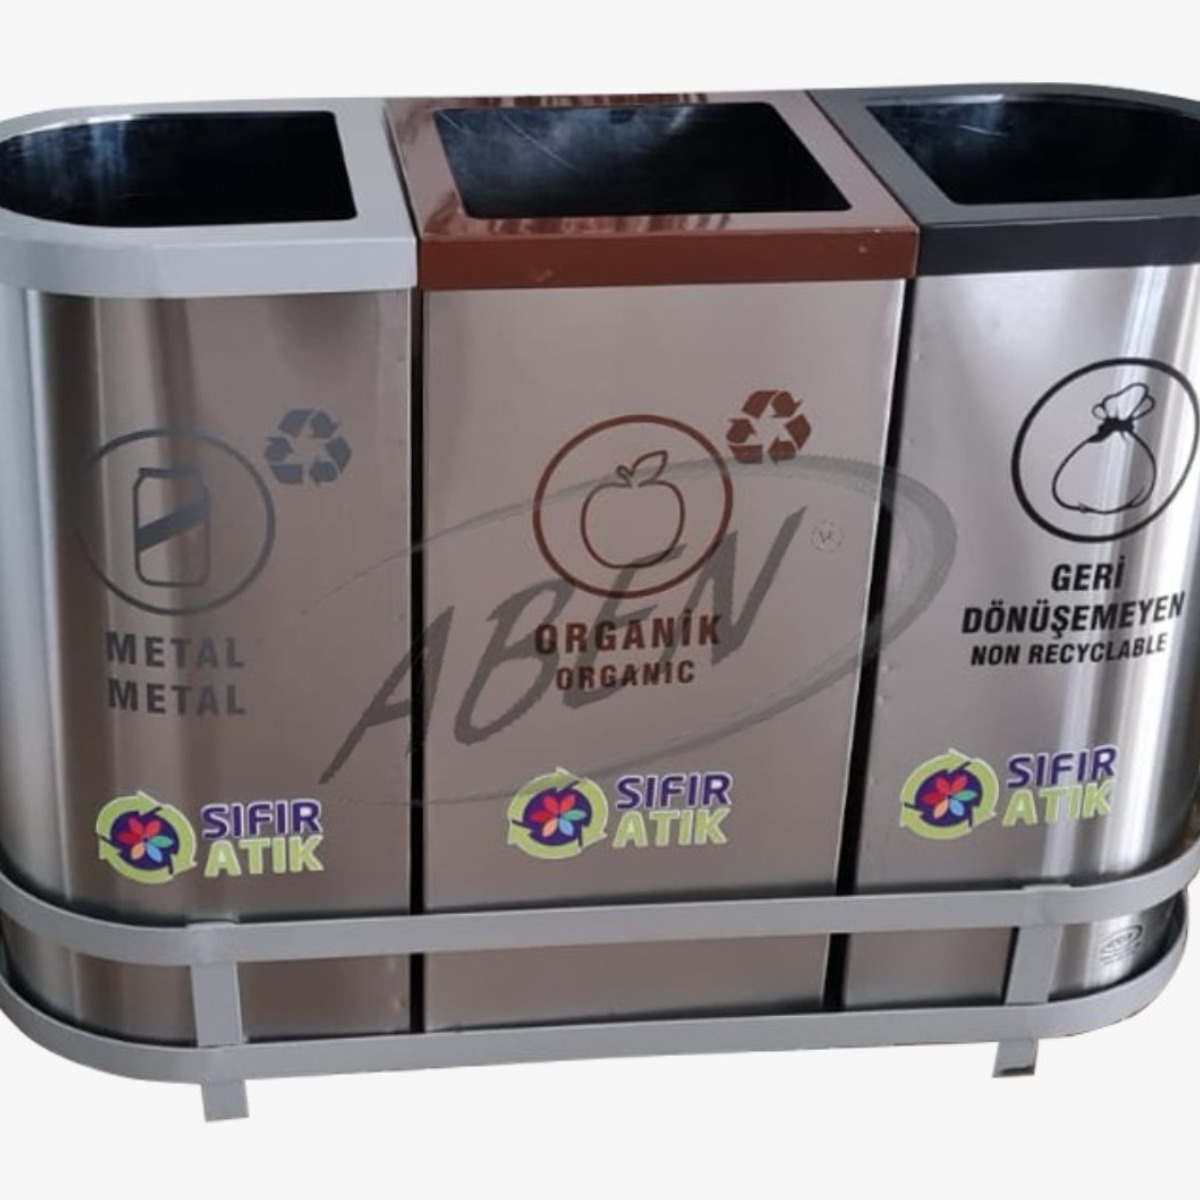 AB-790 3'Part Recycle Bin